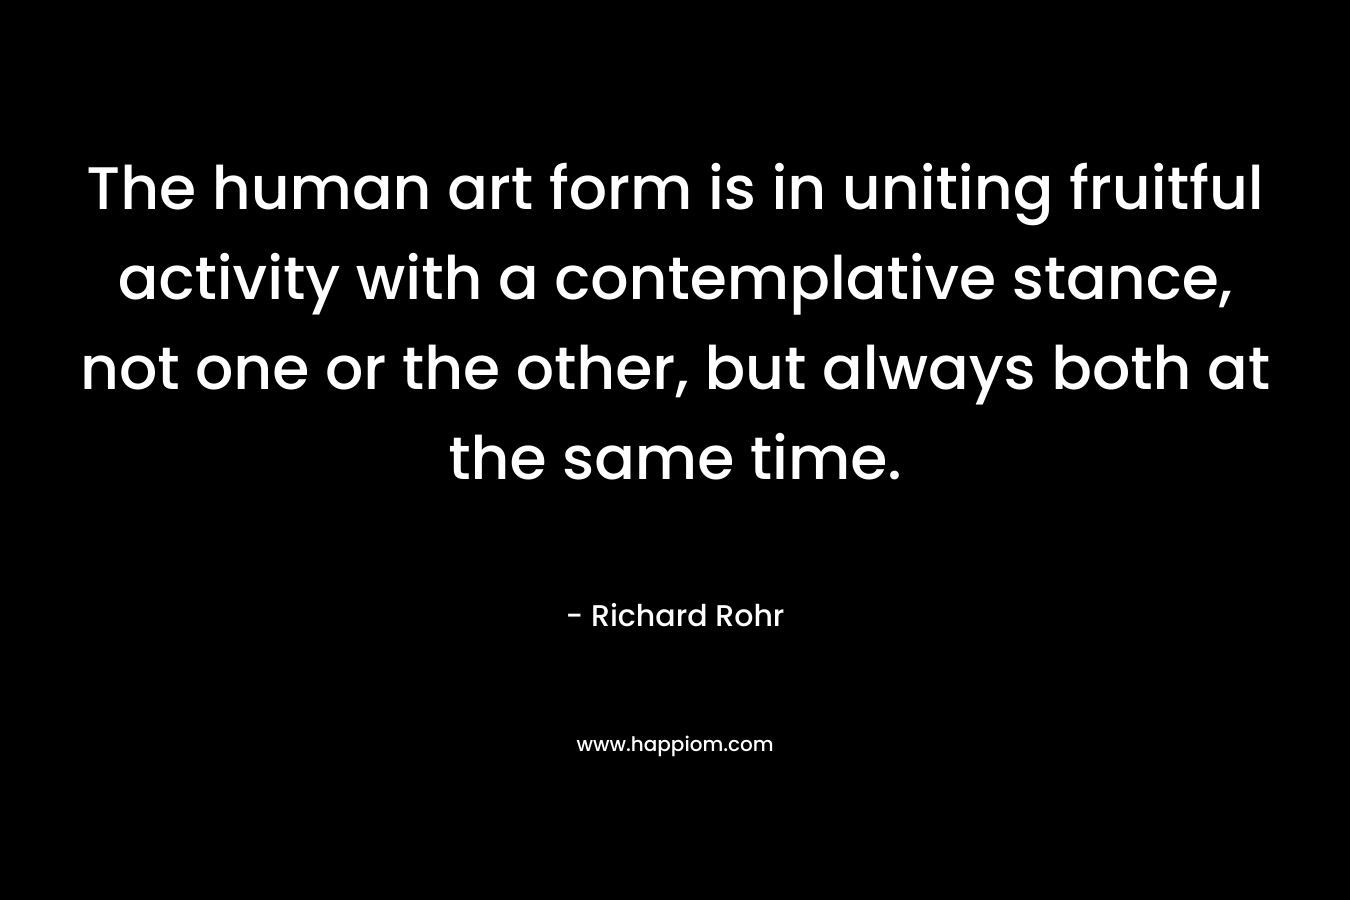 The human art form is in uniting fruitful activity with a contemplative stance, not one or the other, but always both at the same time. – Richard Rohr